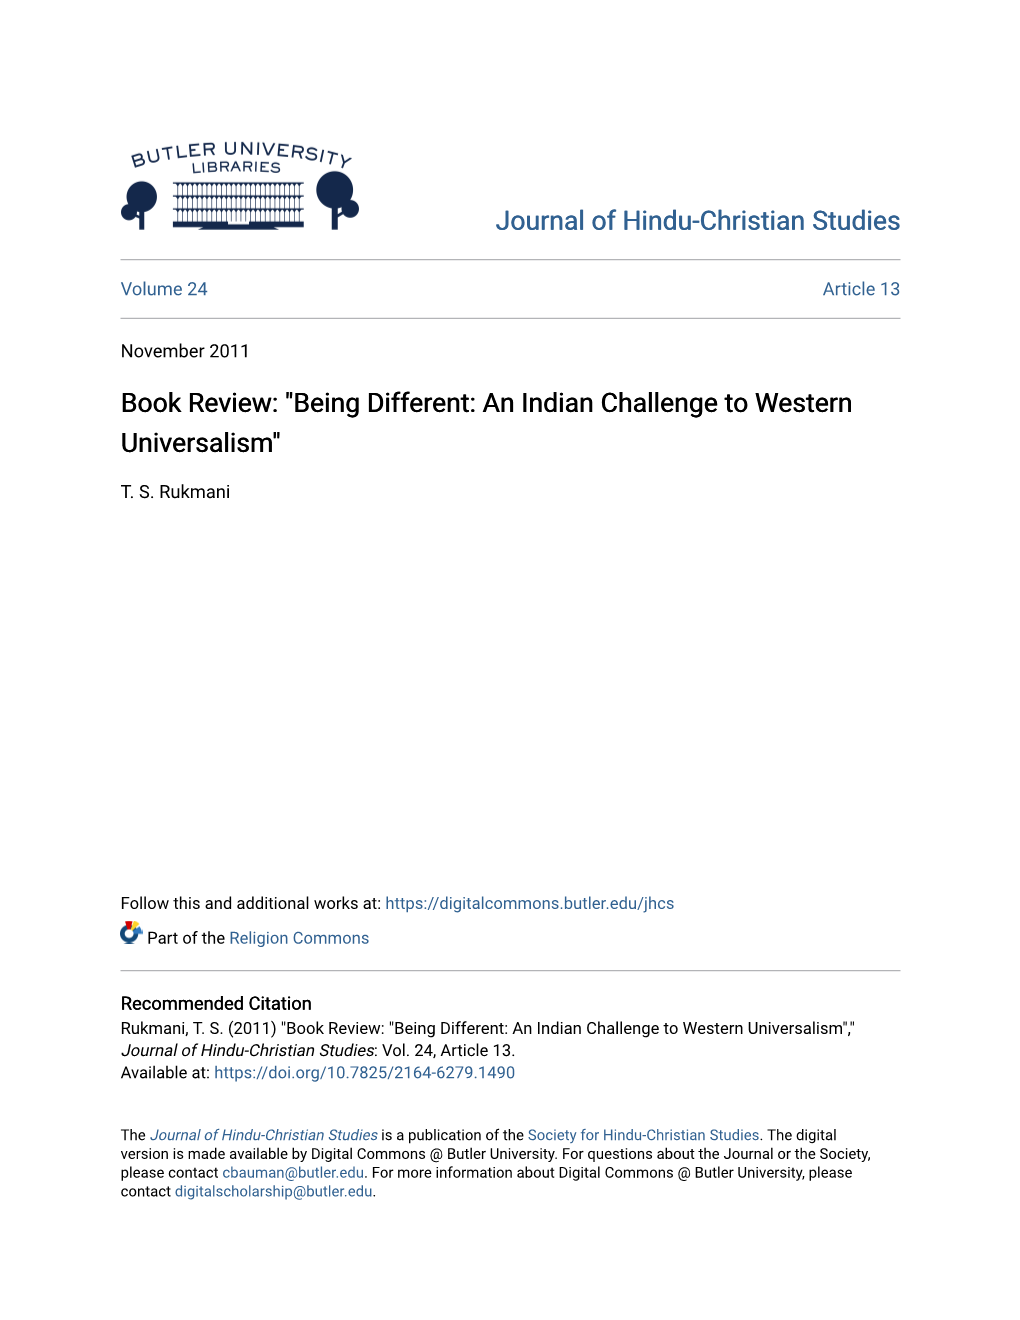 Book Review:" Being Different: an Indian Challenge to Western